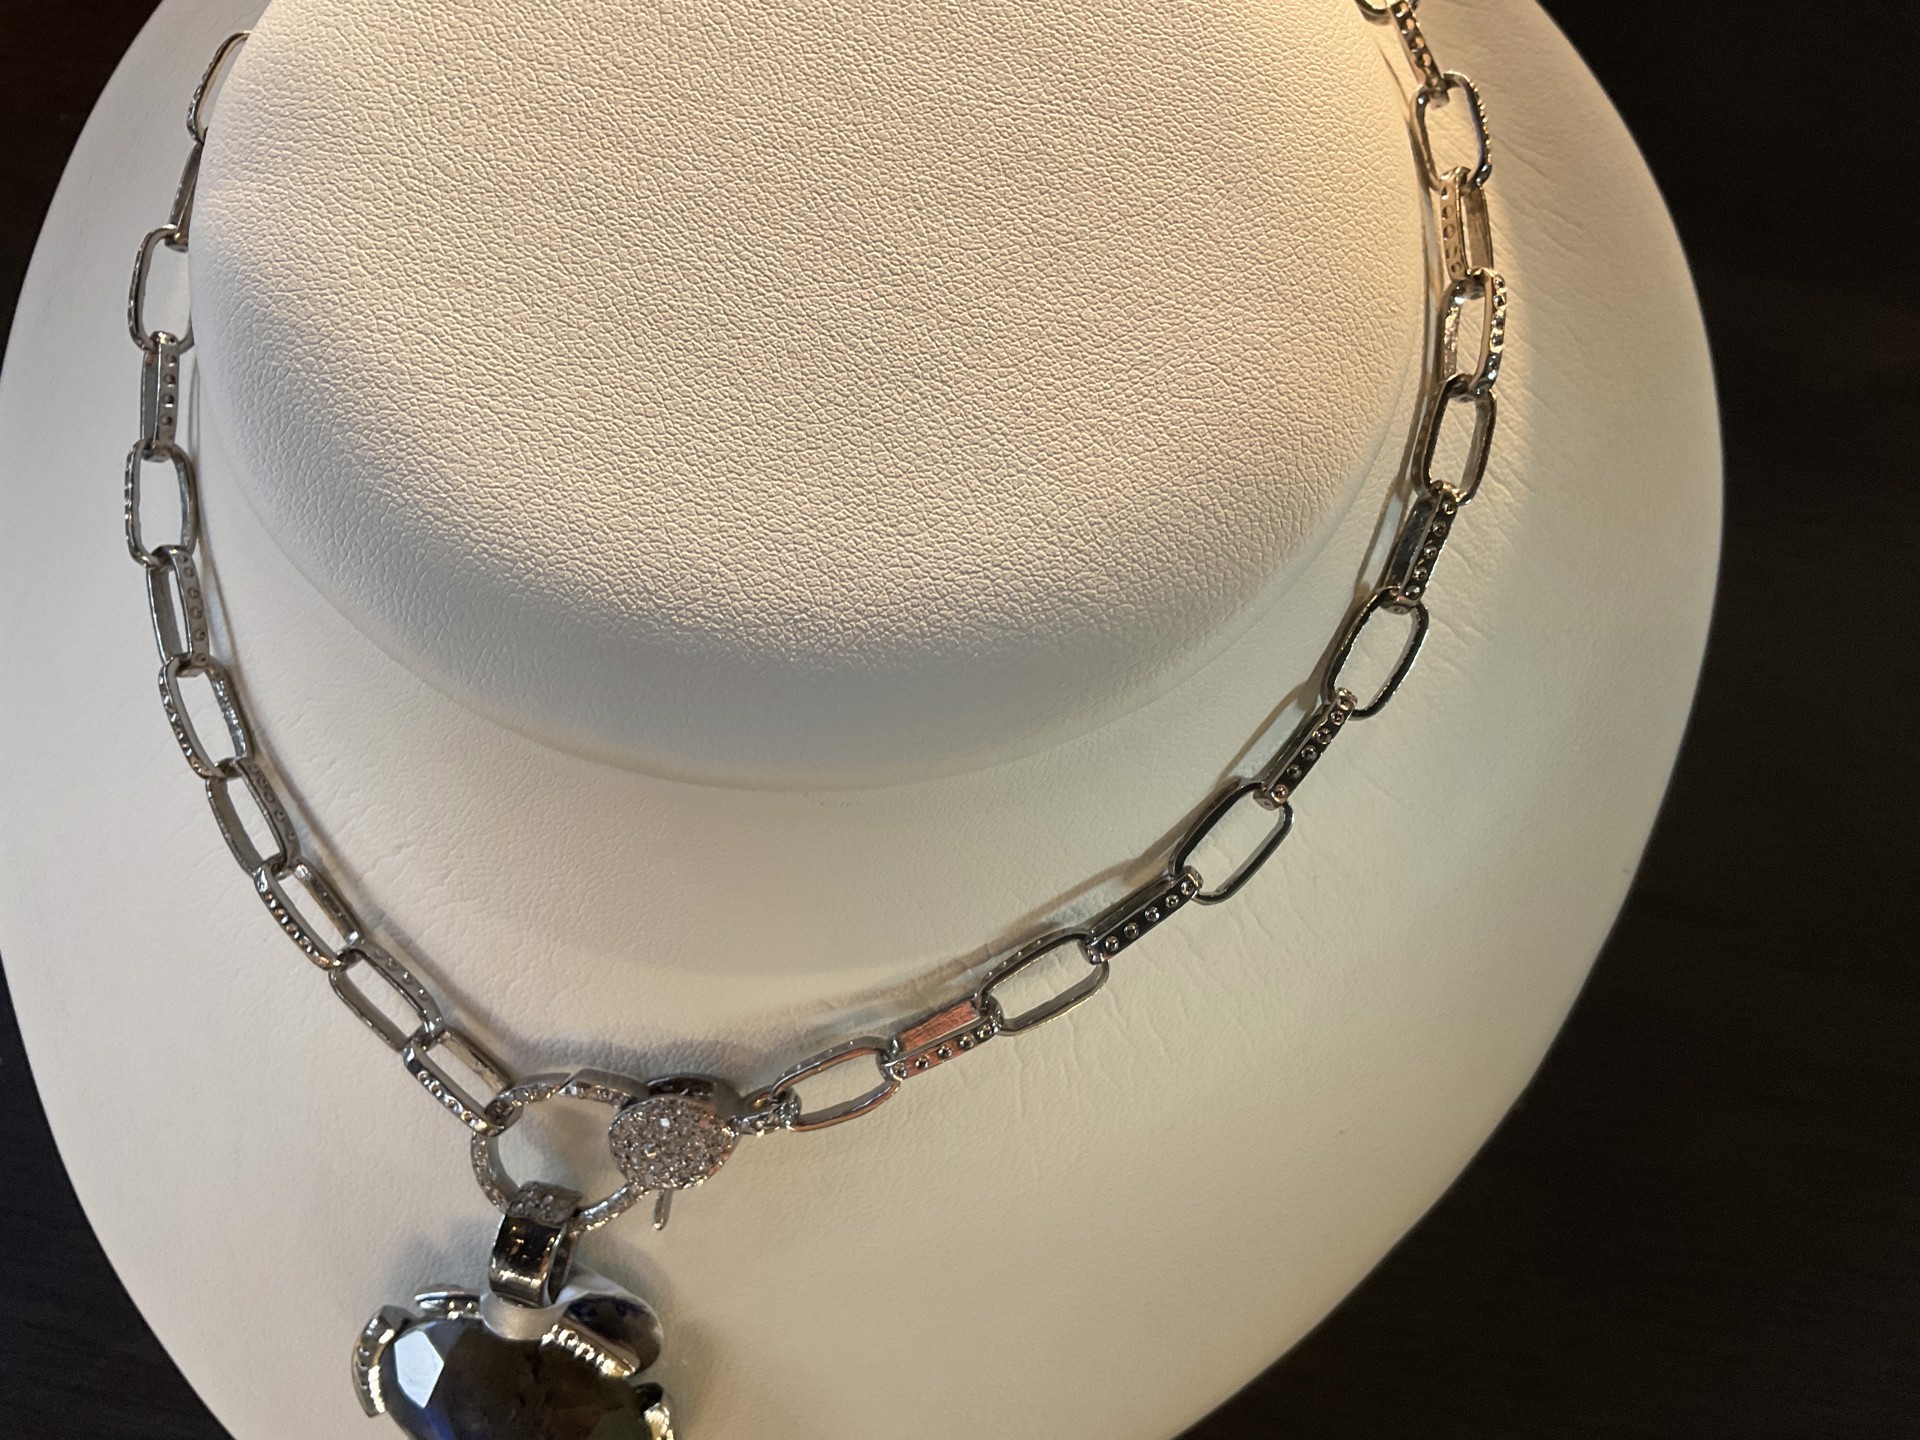 Oxidized Sterling Silver Cable Chain Necklace with Pave Diamond Lobster Clasp-KB-N29, N30 by Karen Birchmier